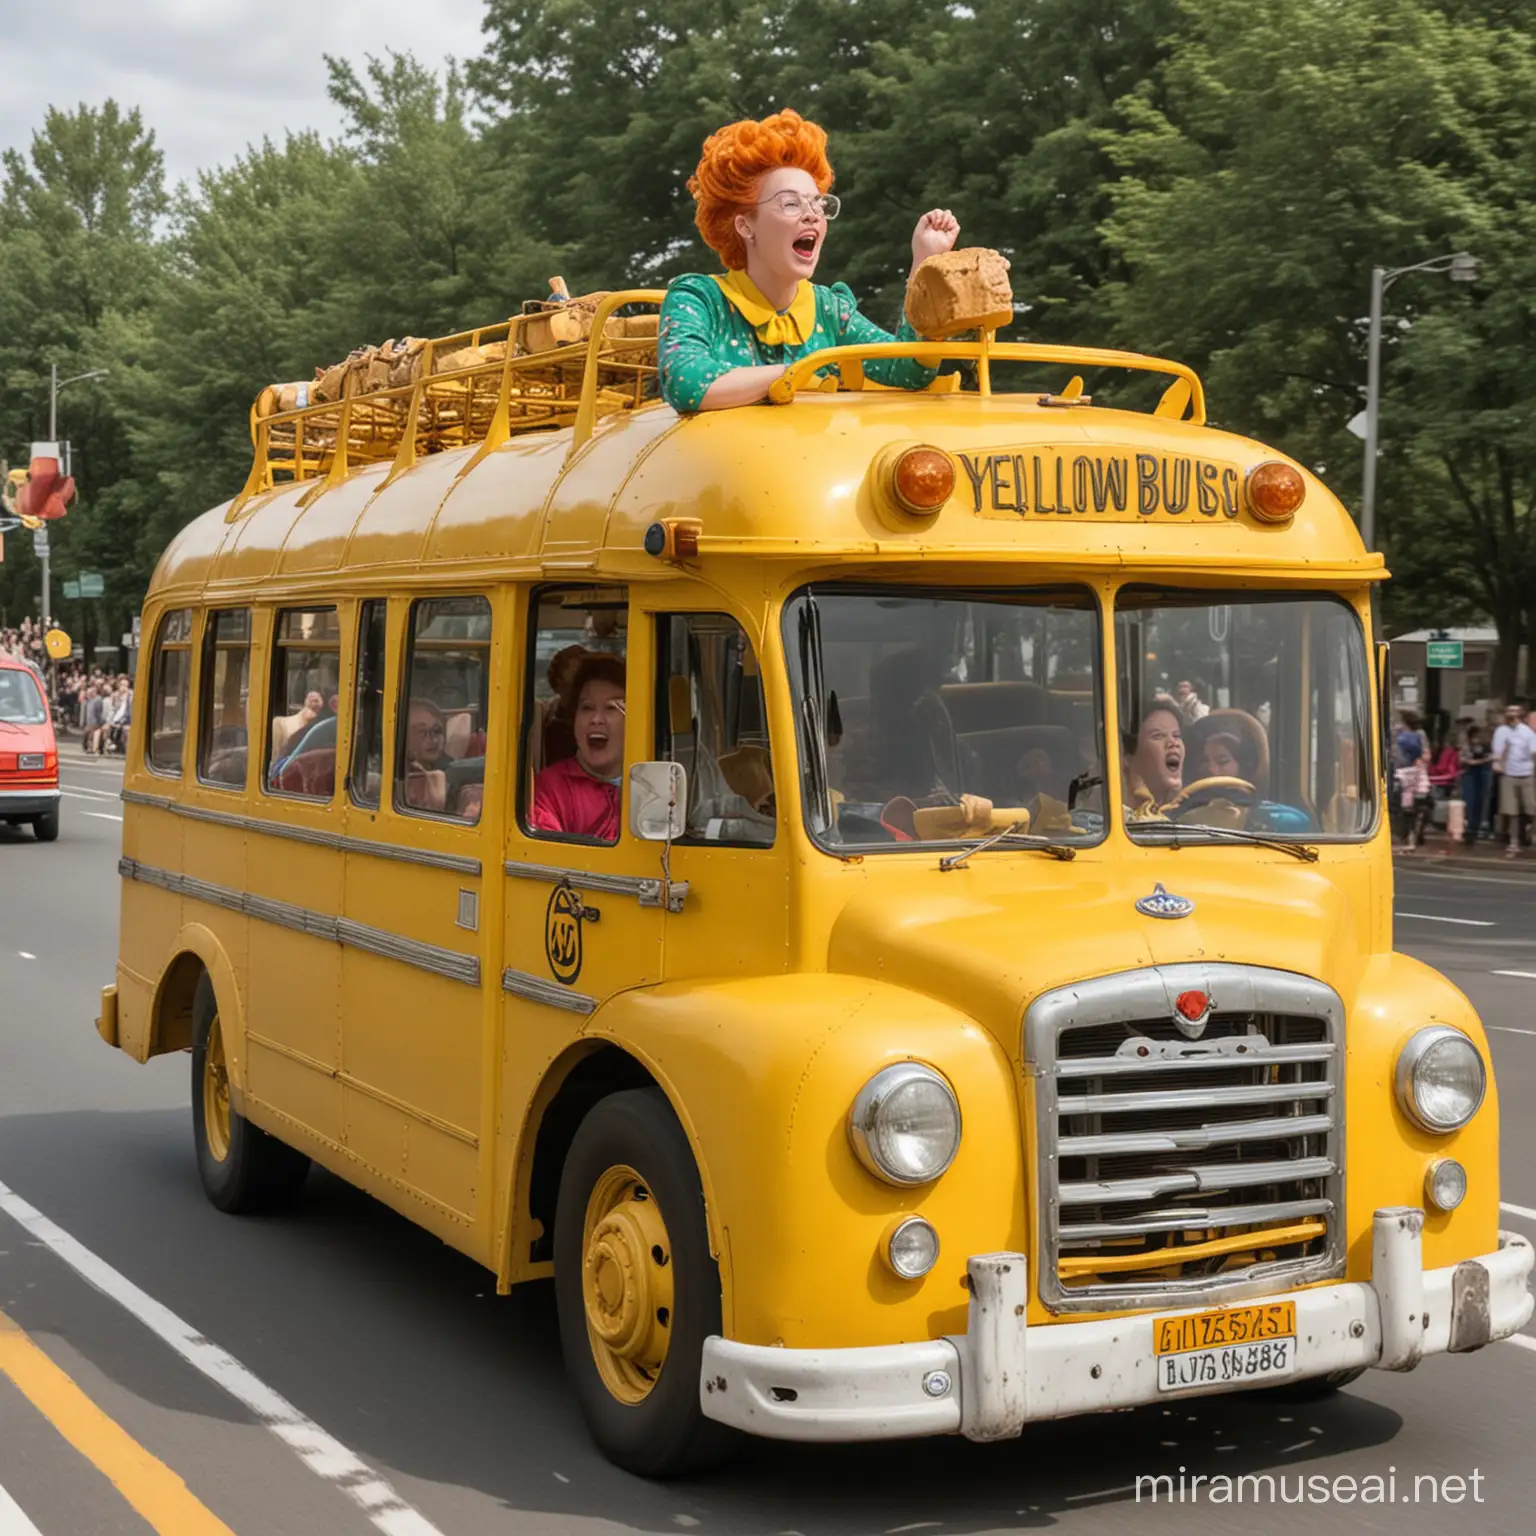 Ms Frizzle driving a huge yellow bus